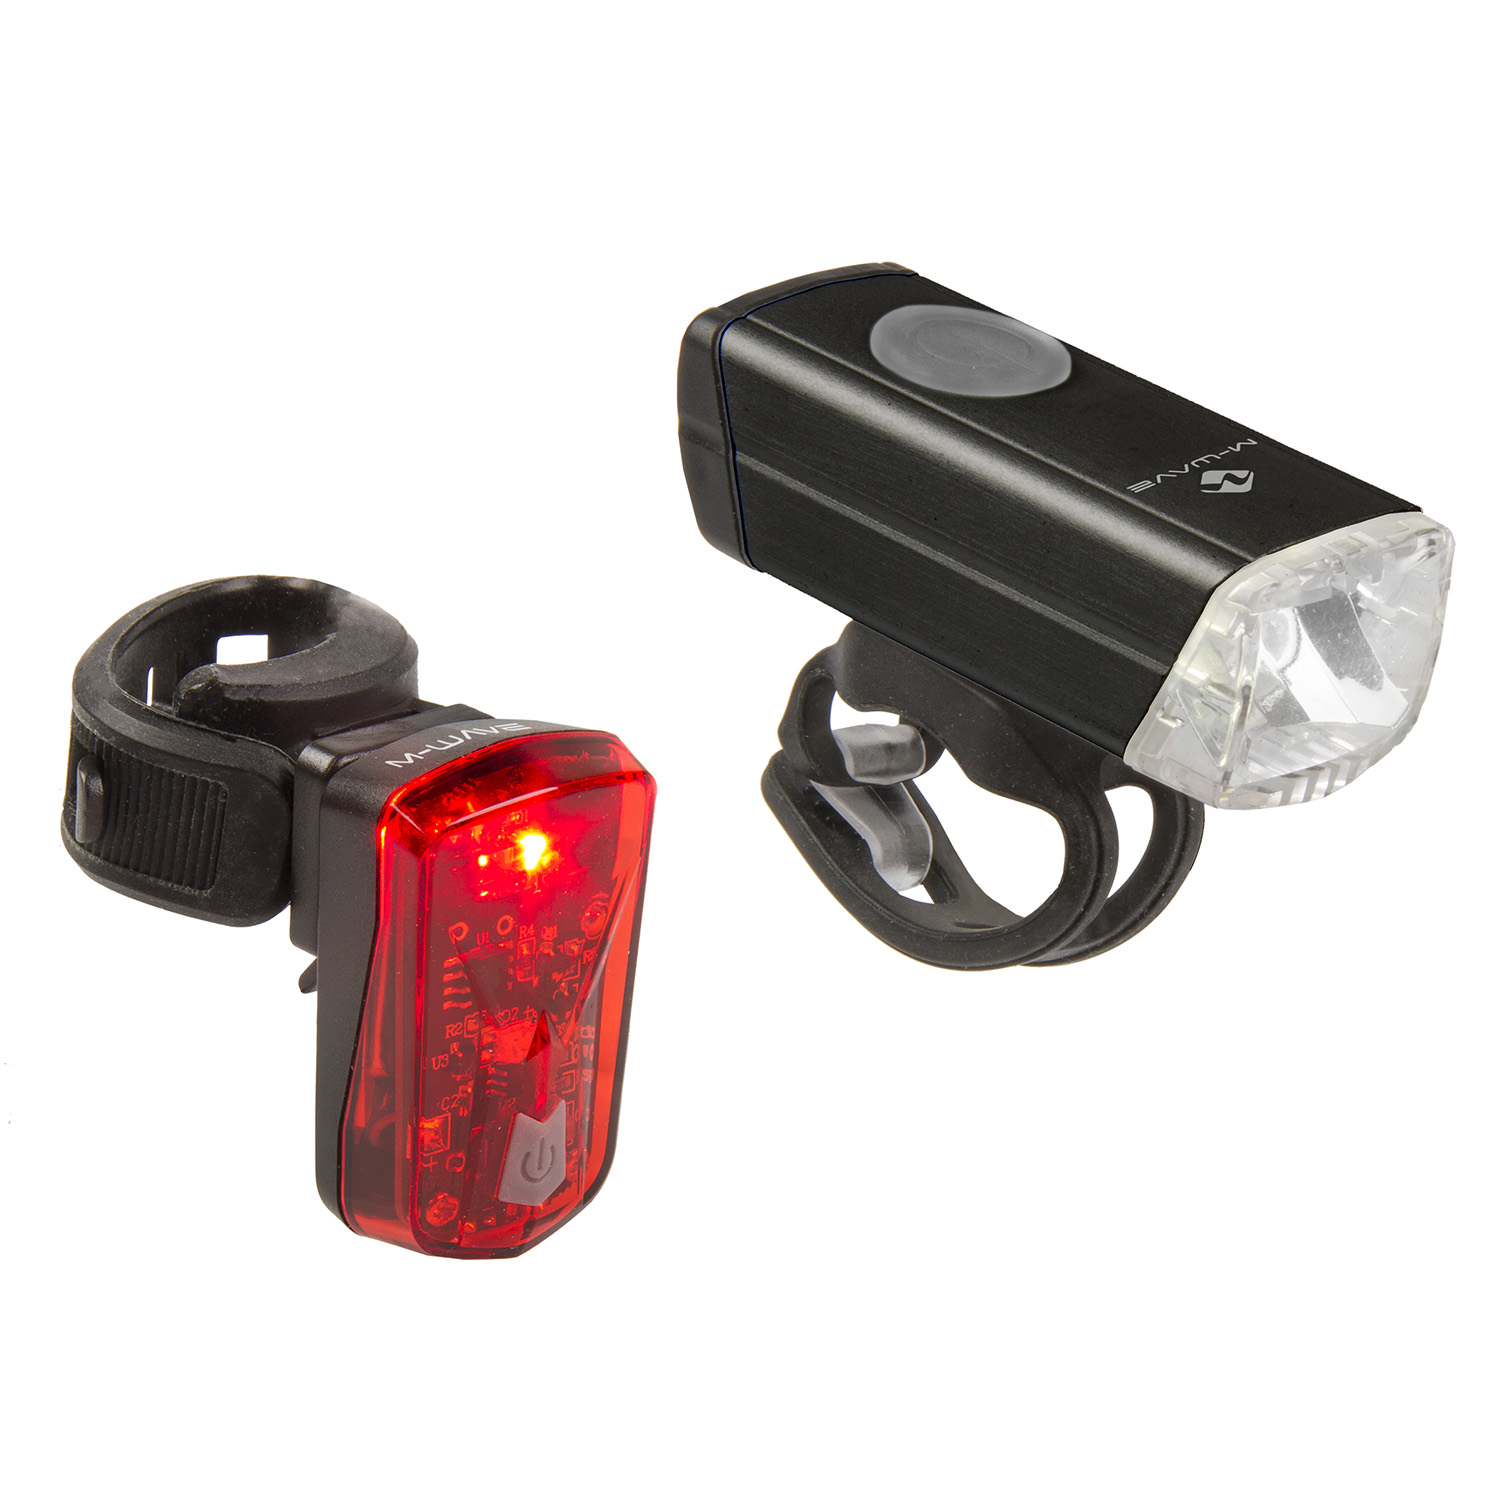 M-WAVE Atlas 20 USB battery pack lamp set – AVAILABLE IN SELECTED BIKE SHOPS